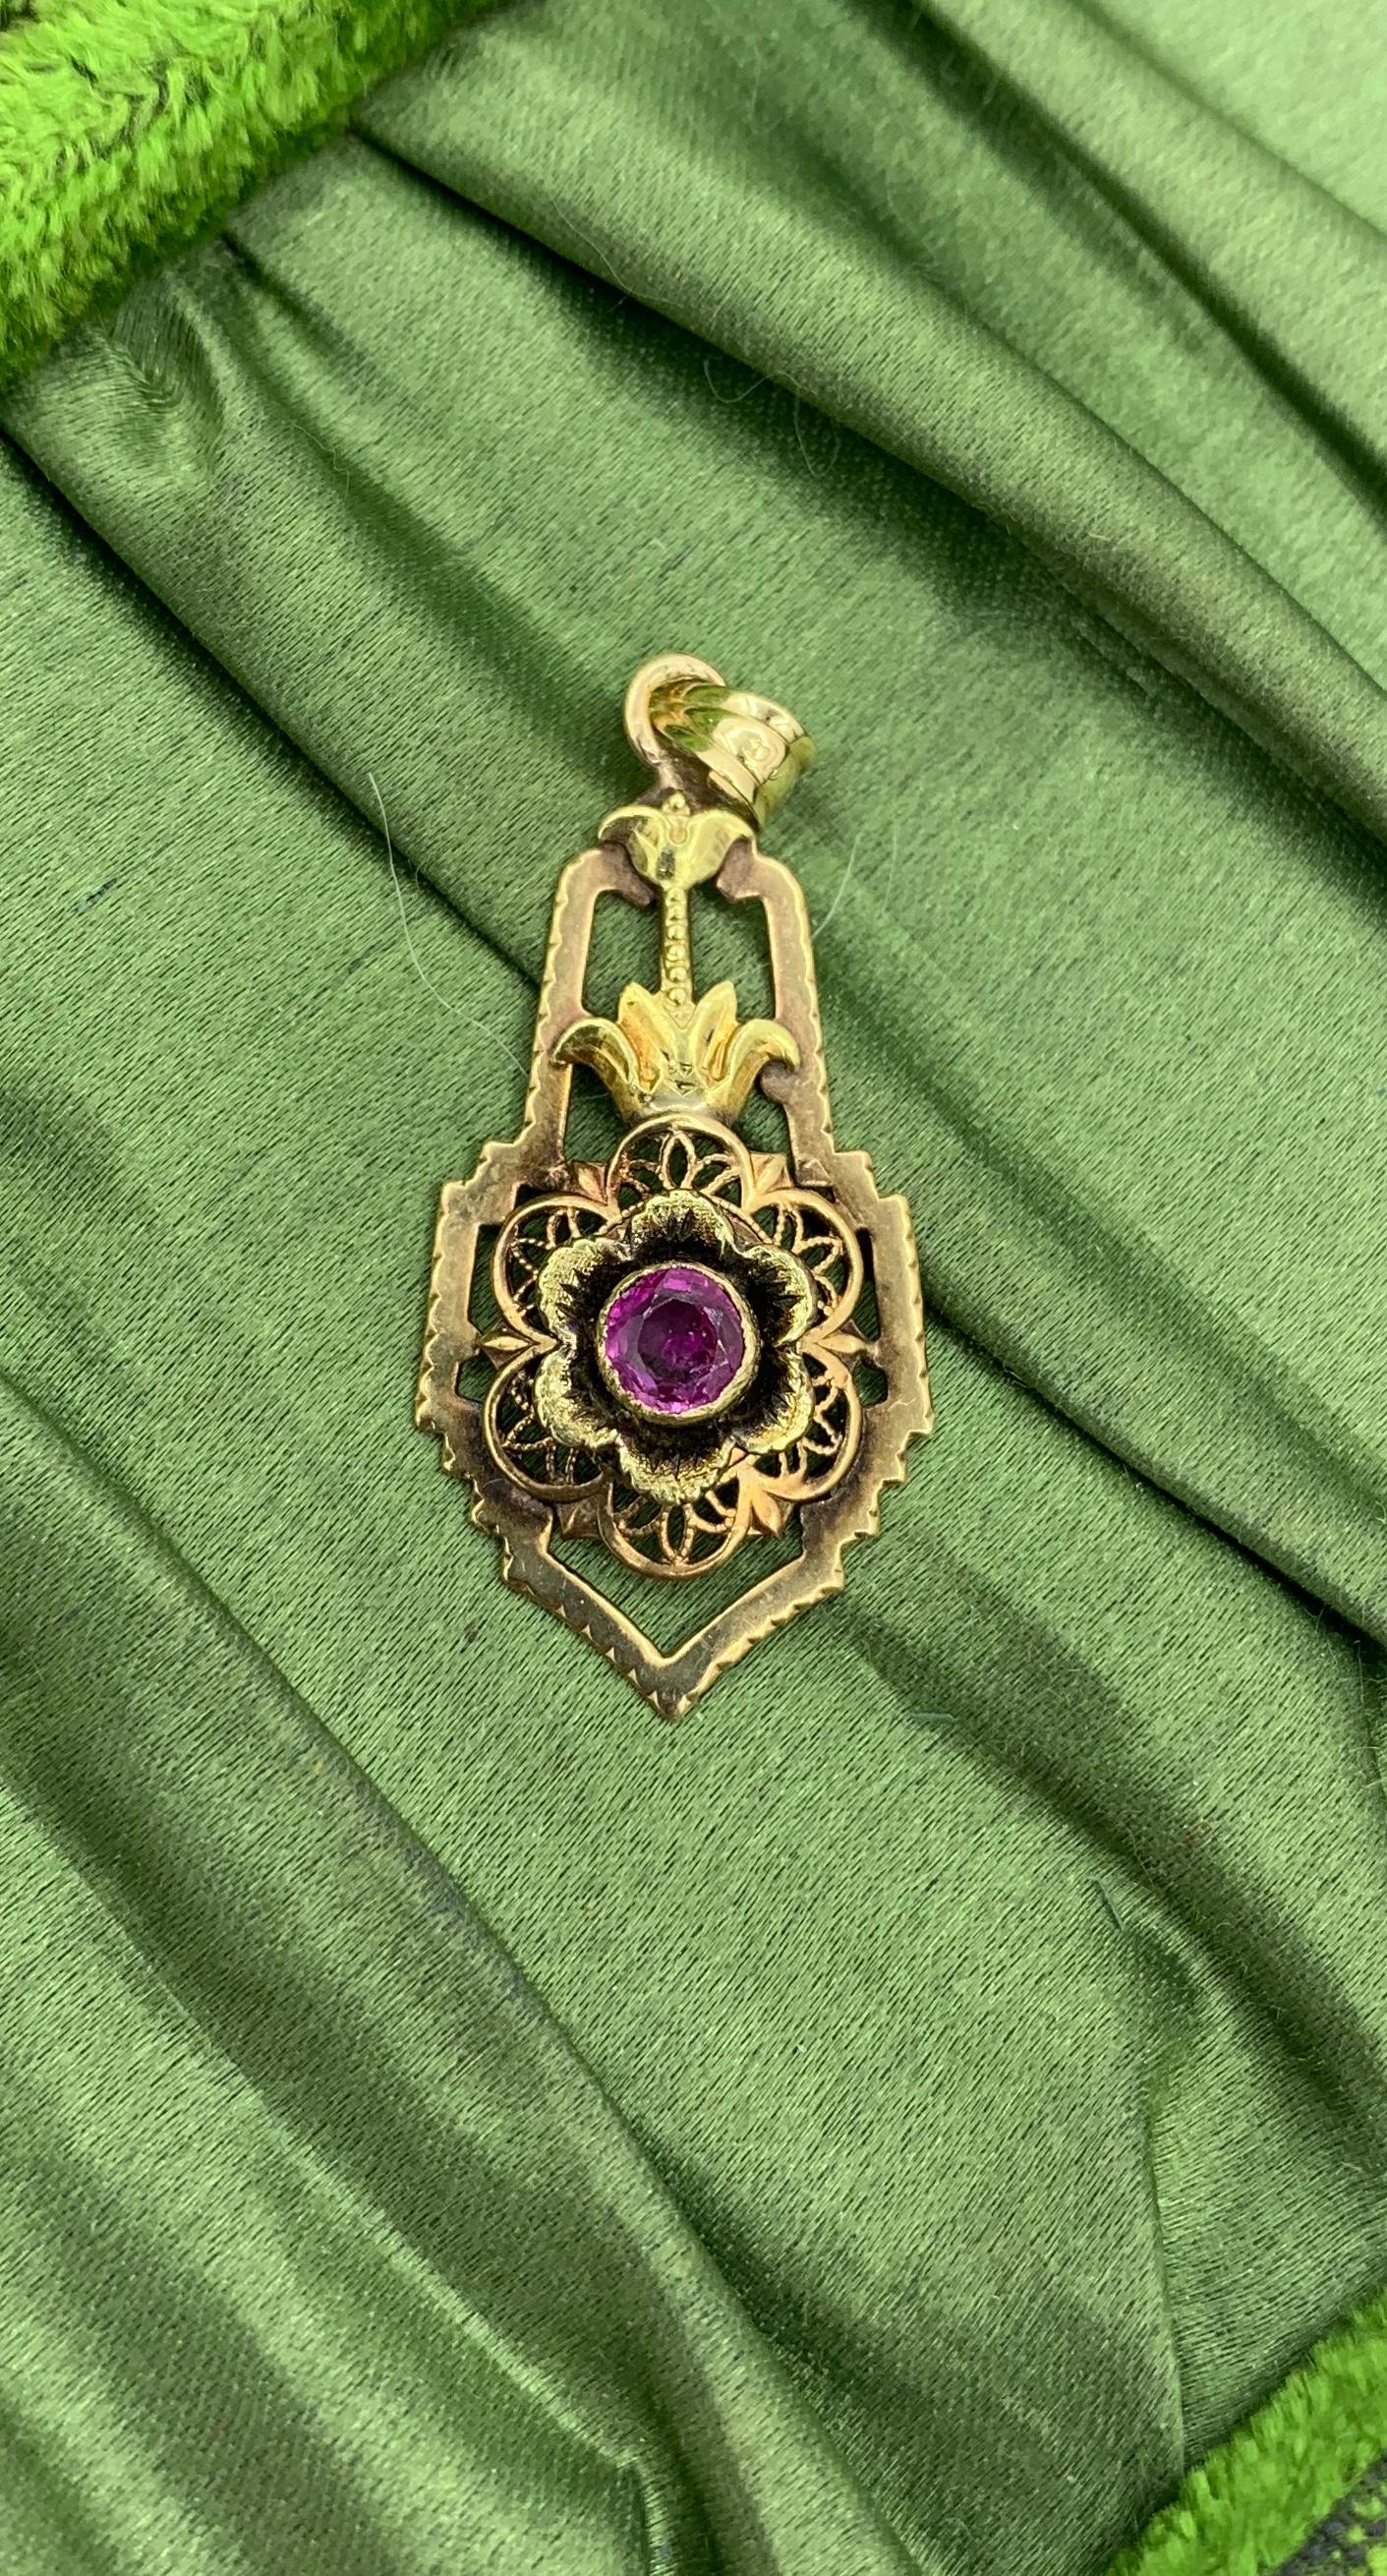 THIS IS AN ART NOUVEAU - BELLE EPOQUE PENDANT IN THE FORM OF A FLOWER WITH A GORGEOUS NATURAL MINED RUBY IN THE CENTER.   THE LAVALIERE IS SO STUNNING WITH THE MOST WONDERFUL THREE DIMENSIONAL DEPICTION OF THE FLOWER.   THE RUBY IS A FINE RED ROUND